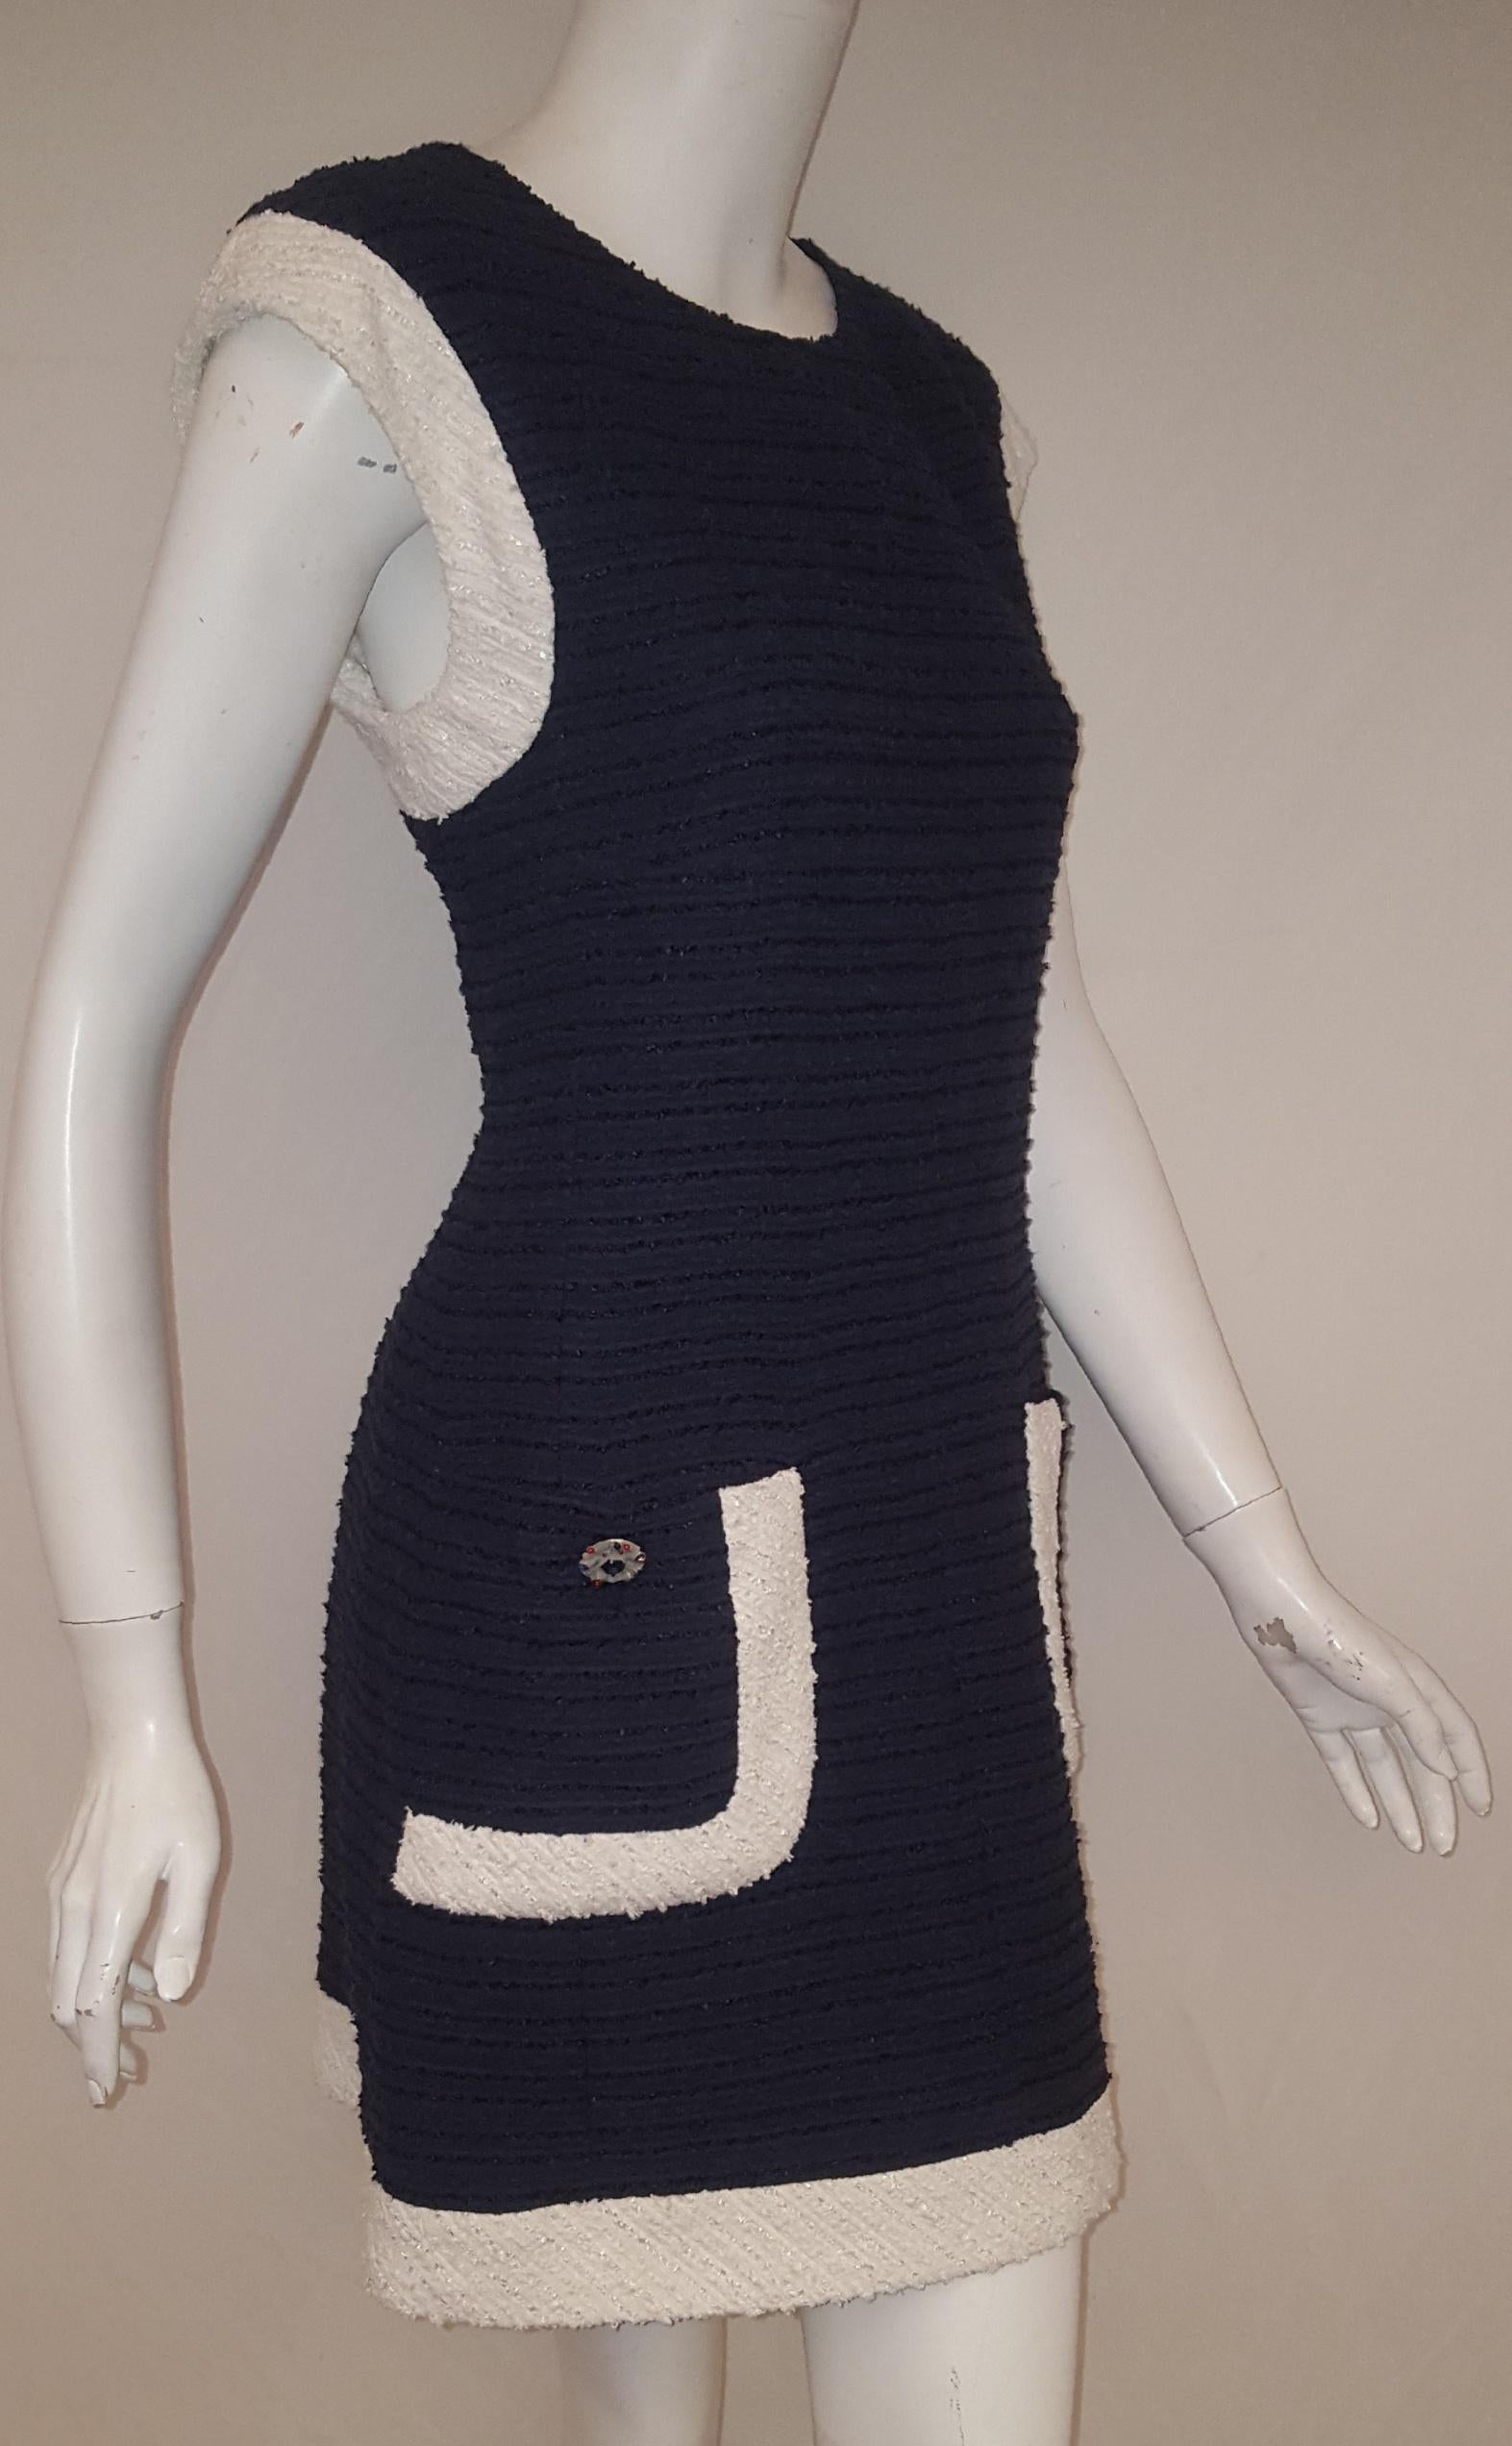 Chanel navy and white boucle sleeveless dress from the 2014 collection includes an artistic multi color gripoix button at each patch pocket.  This dress is trimmed in white boucle around arm opening, patch pocket and  at hem. For closure a hidden